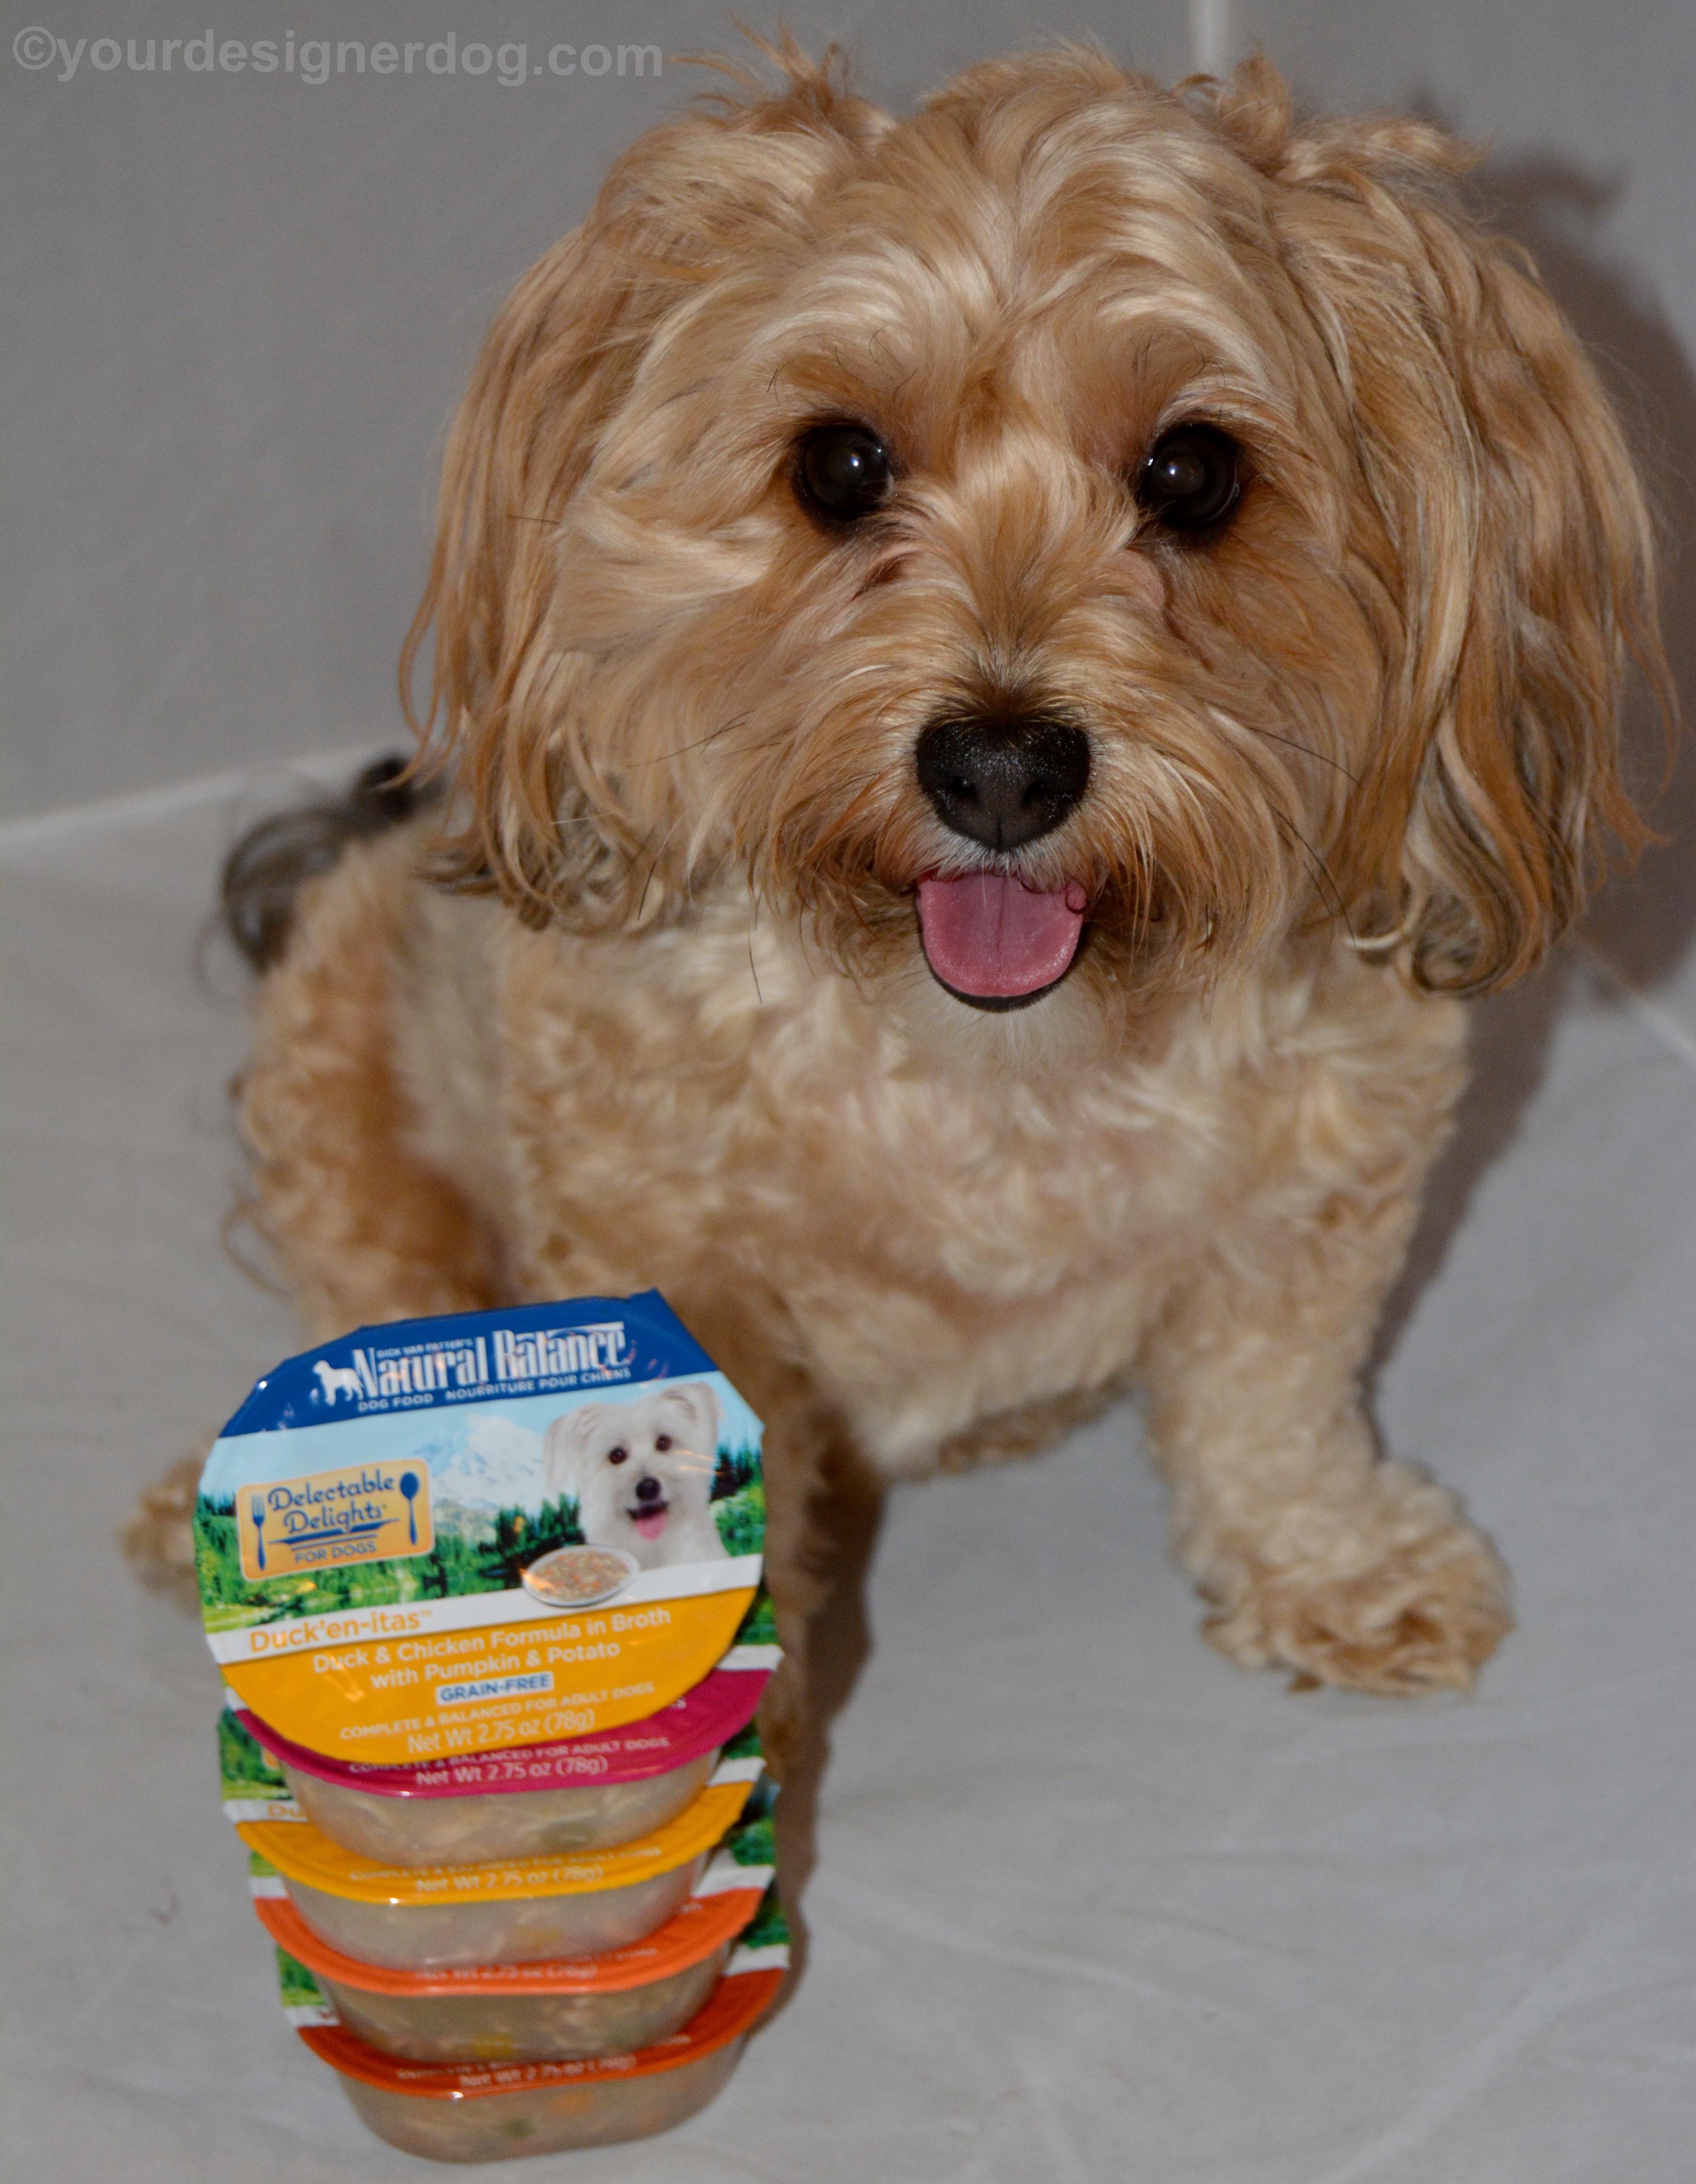 dogs, designer dogs, Yorkipoo, yorkie poo, dog food, natural balance, delectable Delights